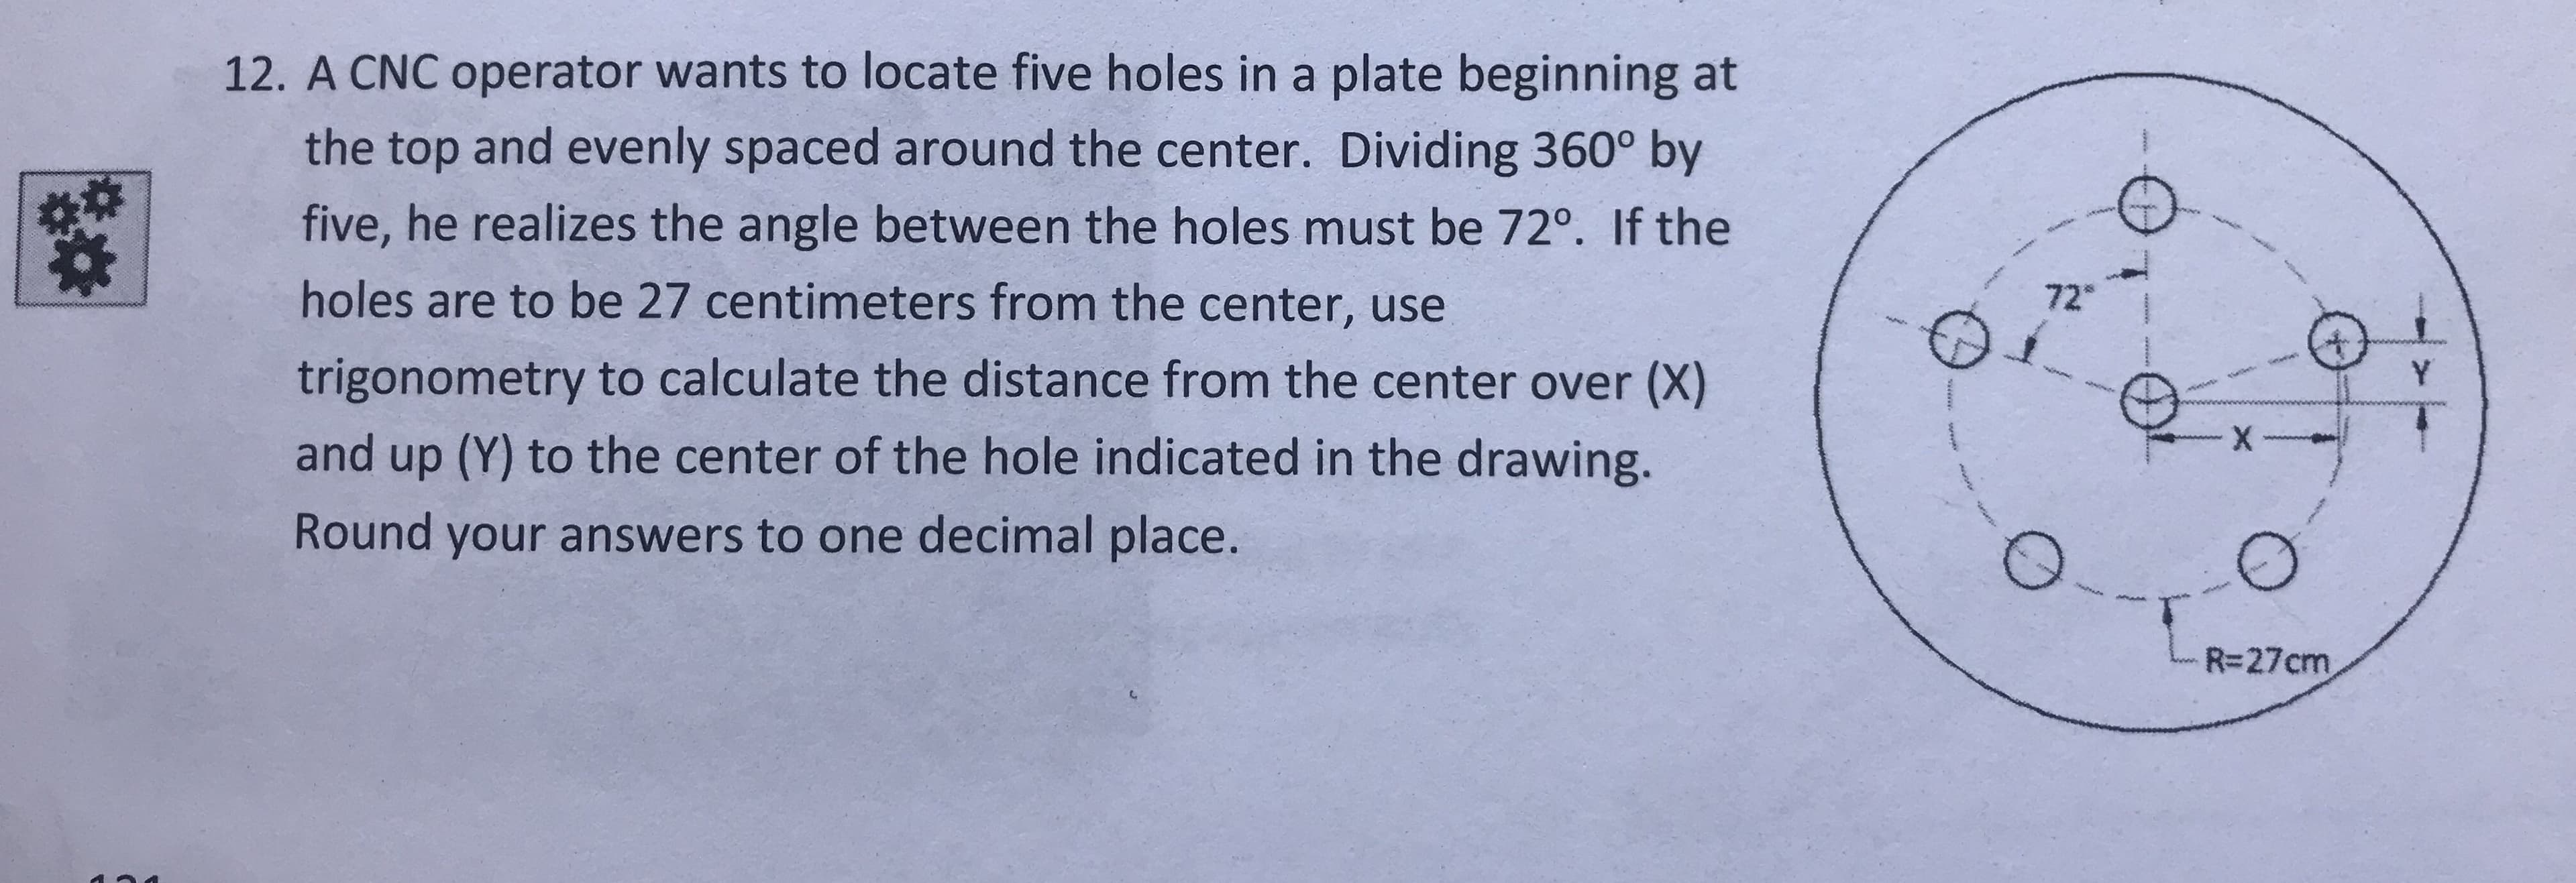 12. A CNC operator wants to locate five holes in a plate beginning at
the top and evenly spaced around the center. Dividing 360° by
five, he realizes the angle between the holes must be 720. If the
holes are to be 27 centimeters from the center, use
trigonometry to calculate the distance from the center over (X)
and up (Y) to the center of the hole indicated in the drawing.
Round your answers to one decimal place.
72
R-27cm
